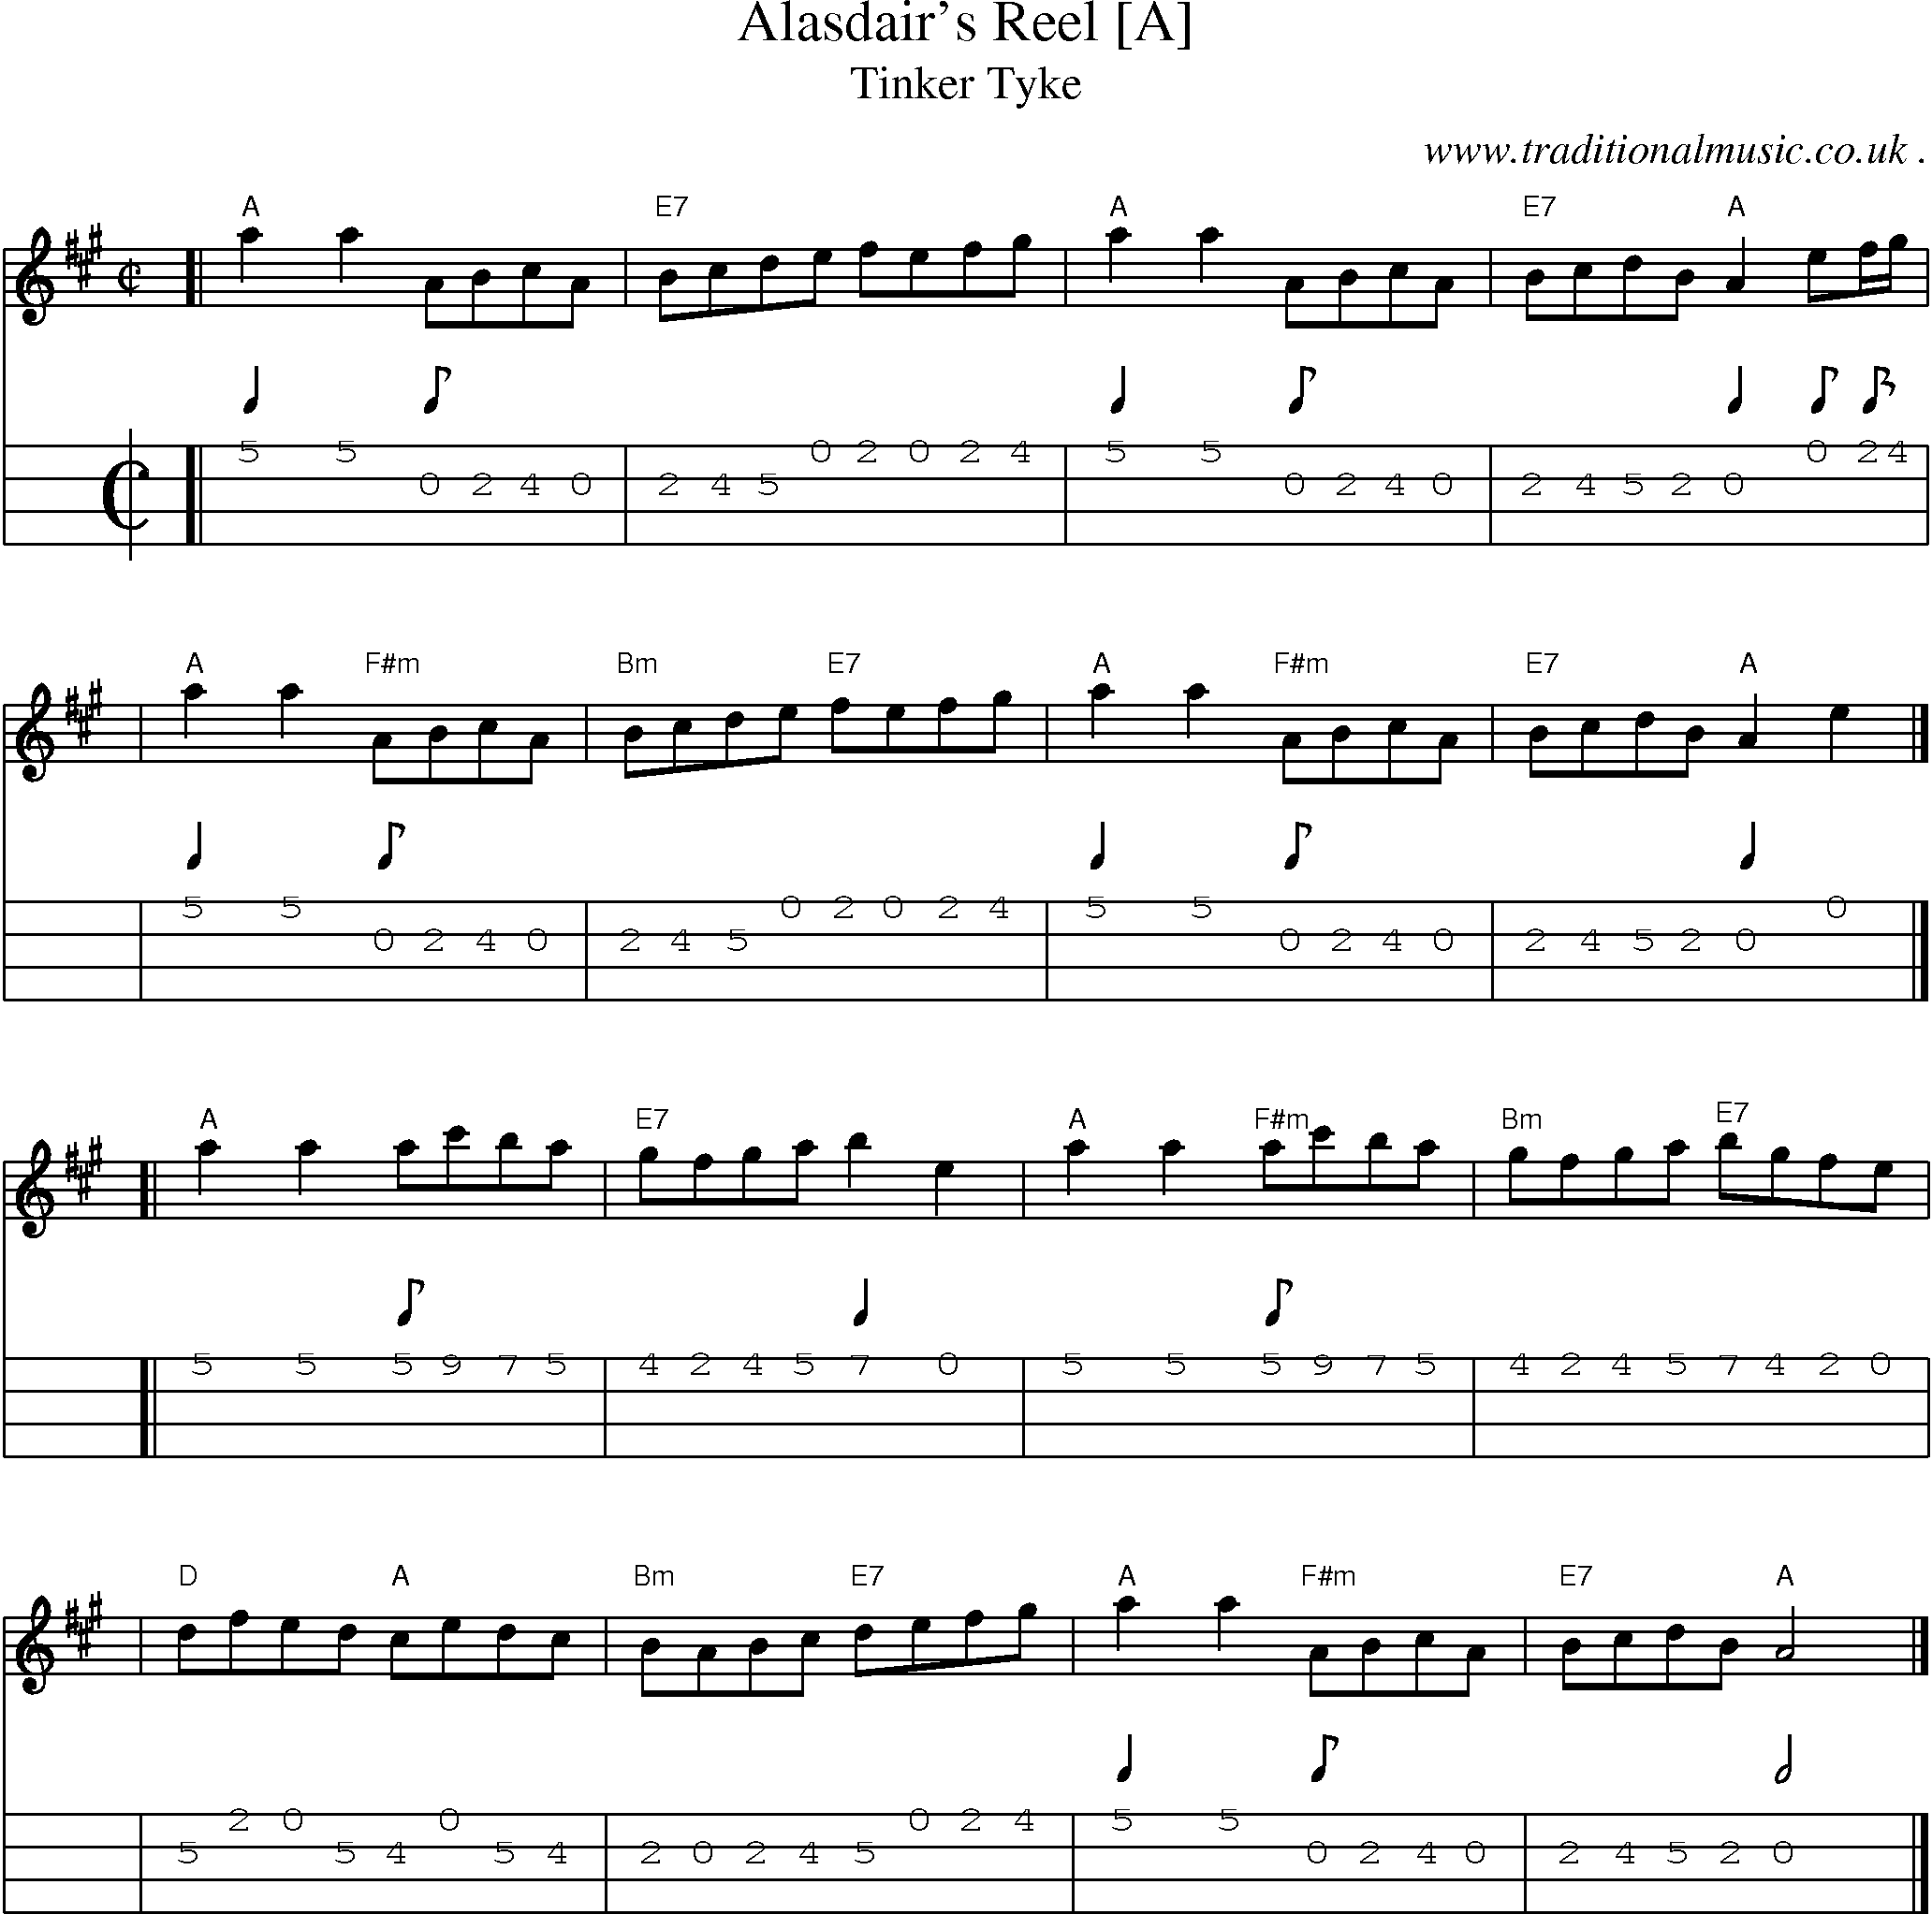 Sheet-music  score, Chords and Mandolin Tabs for Alasdairs Reel [a]